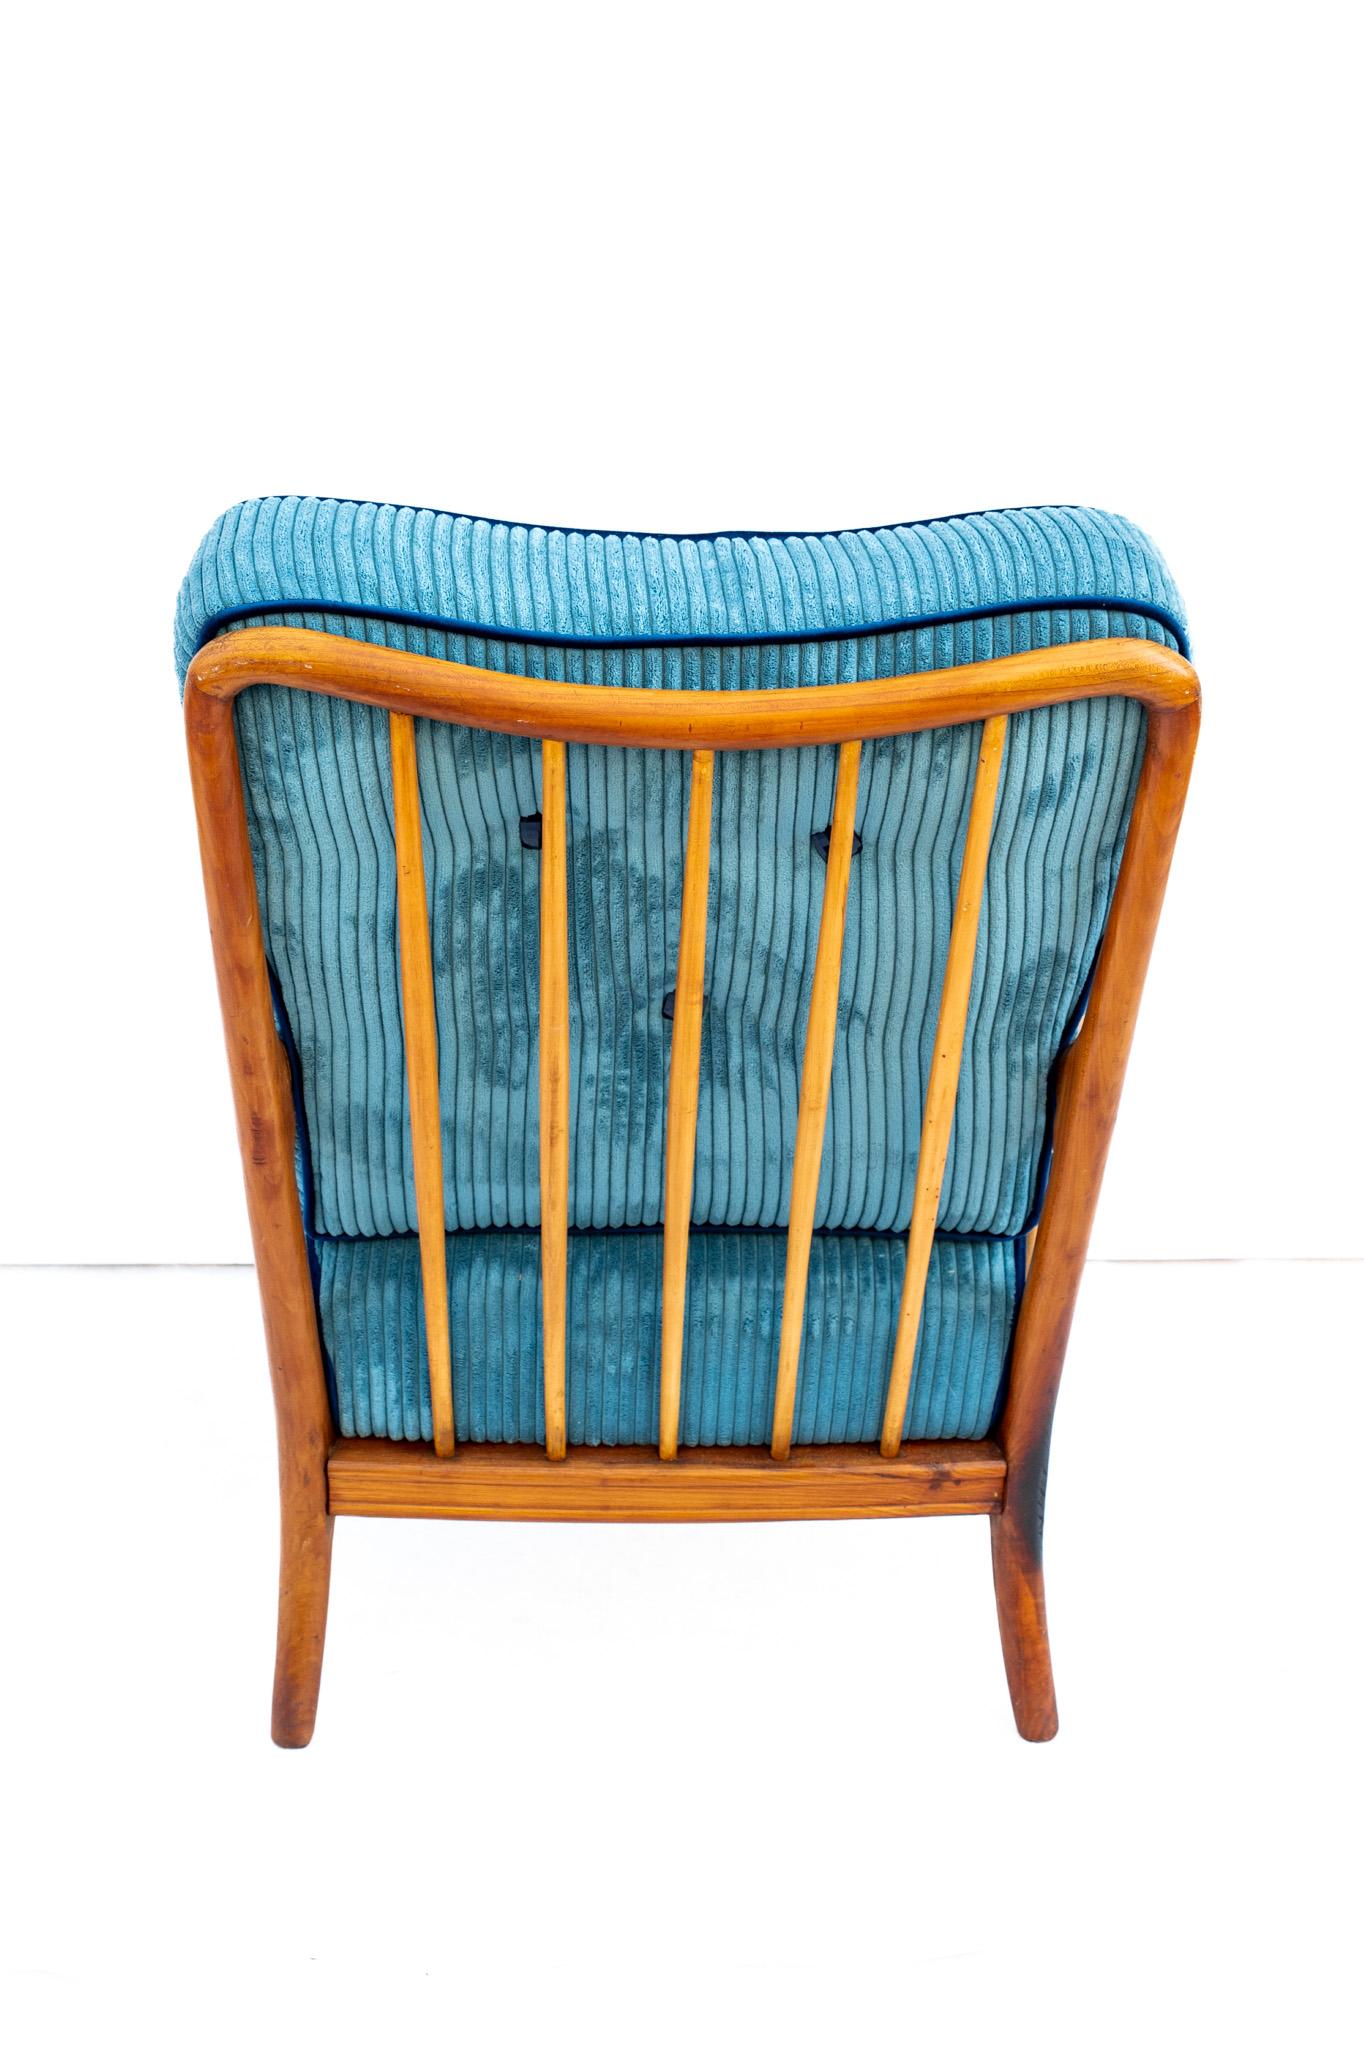 Velvet armchair by Paolo Buffa, Made in Italy, 1950s.  
One of the most iconic and important models of mid-century Italian design. The frame of this armchair is made of wood, the cushions upholstered in light blue corduroy with blue piping. The